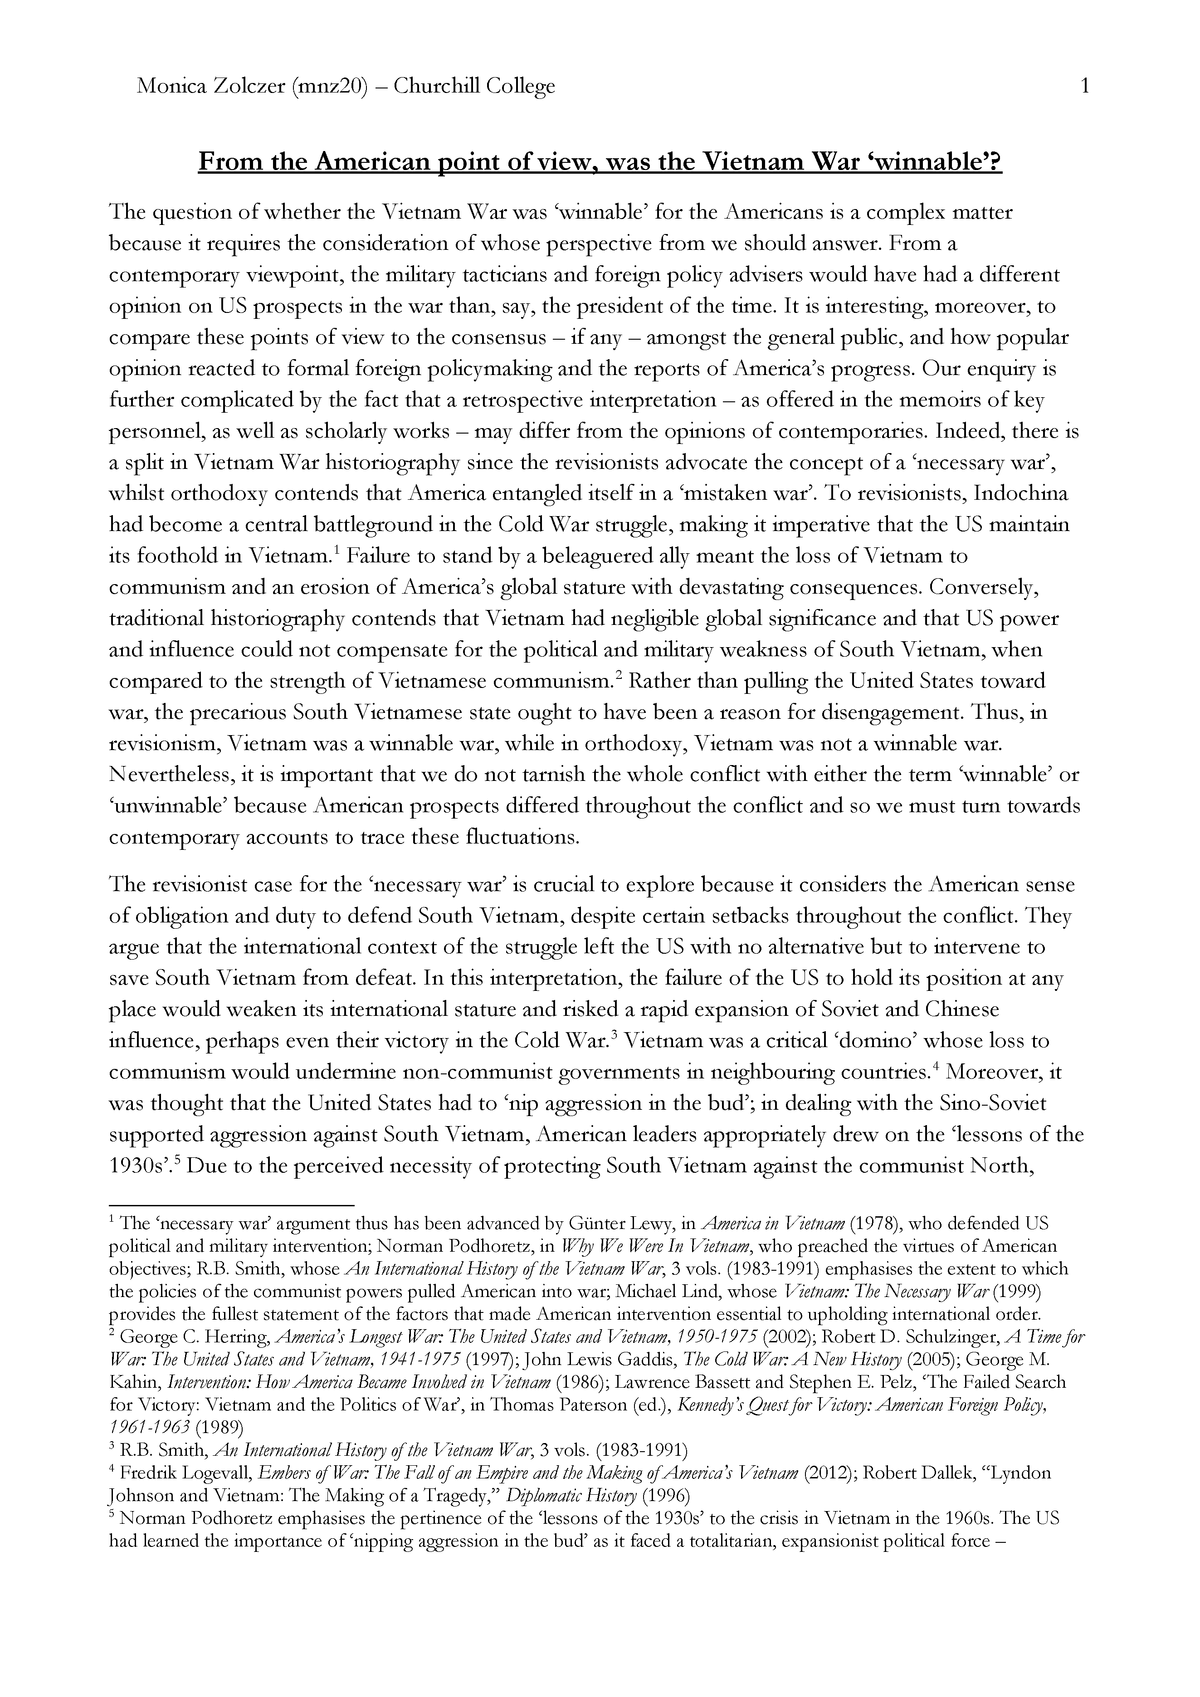 Essay for college experience